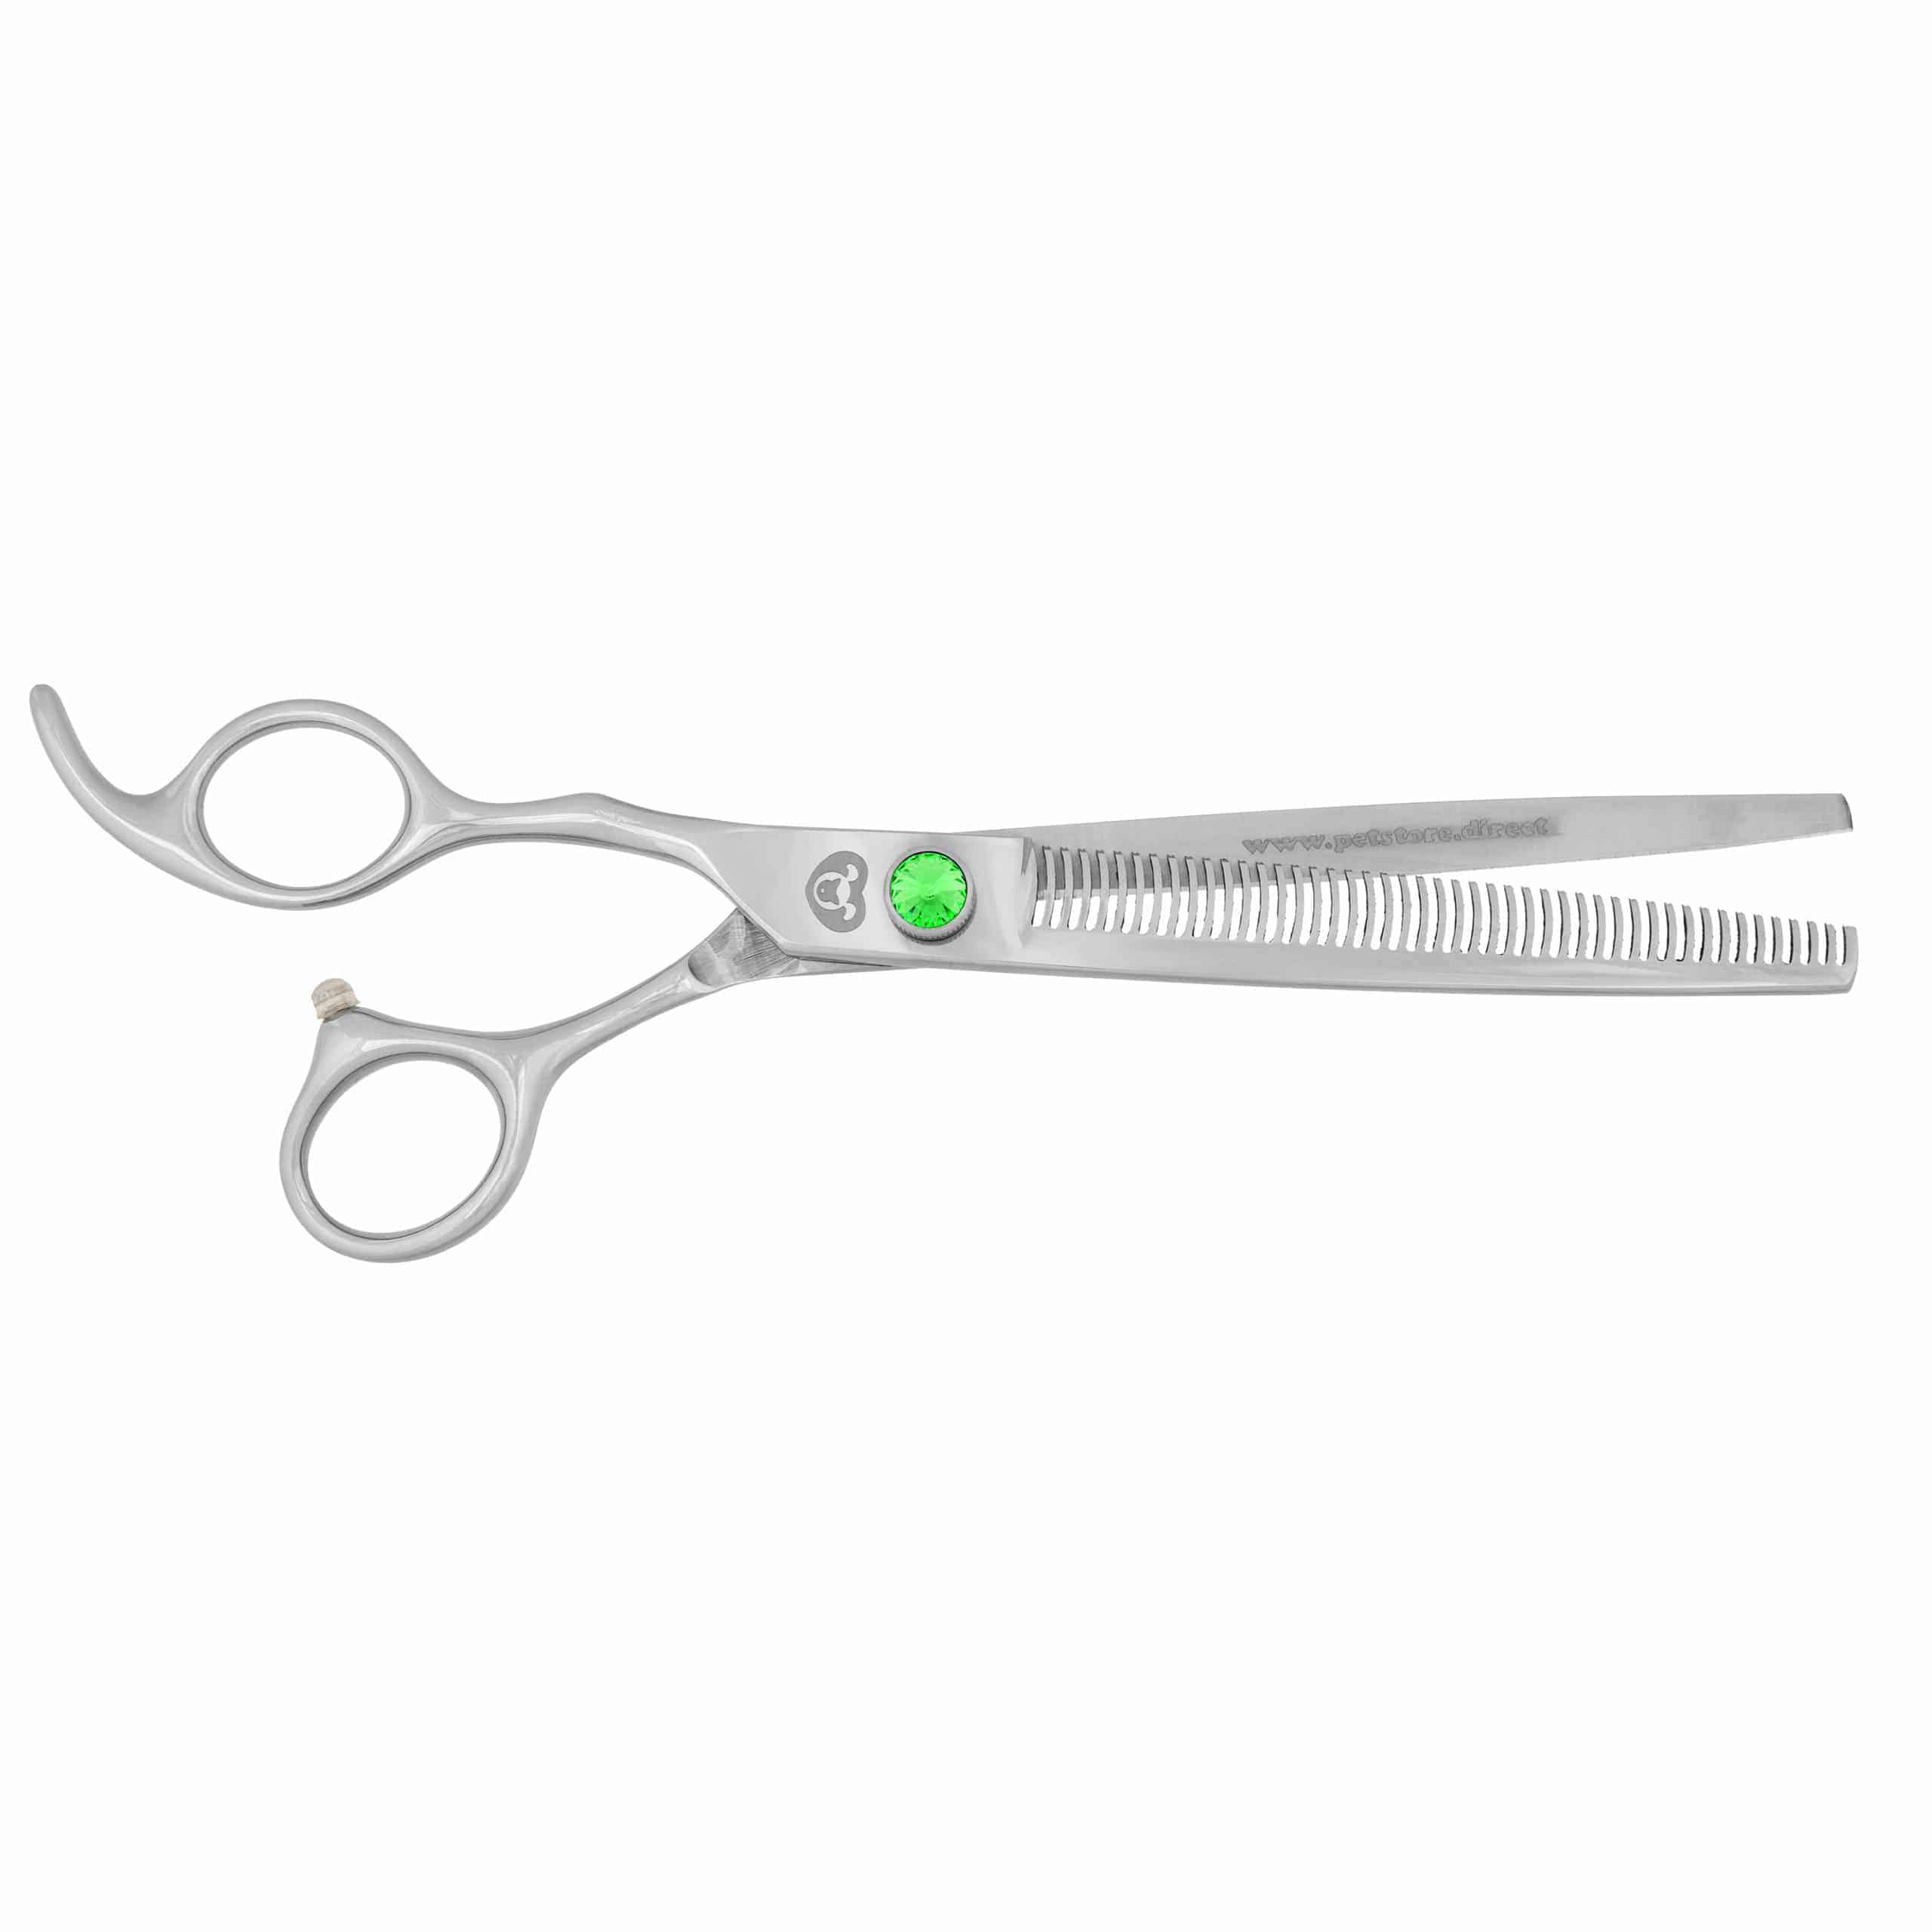 petstore direct 7 46T straight left-handed thinning shears